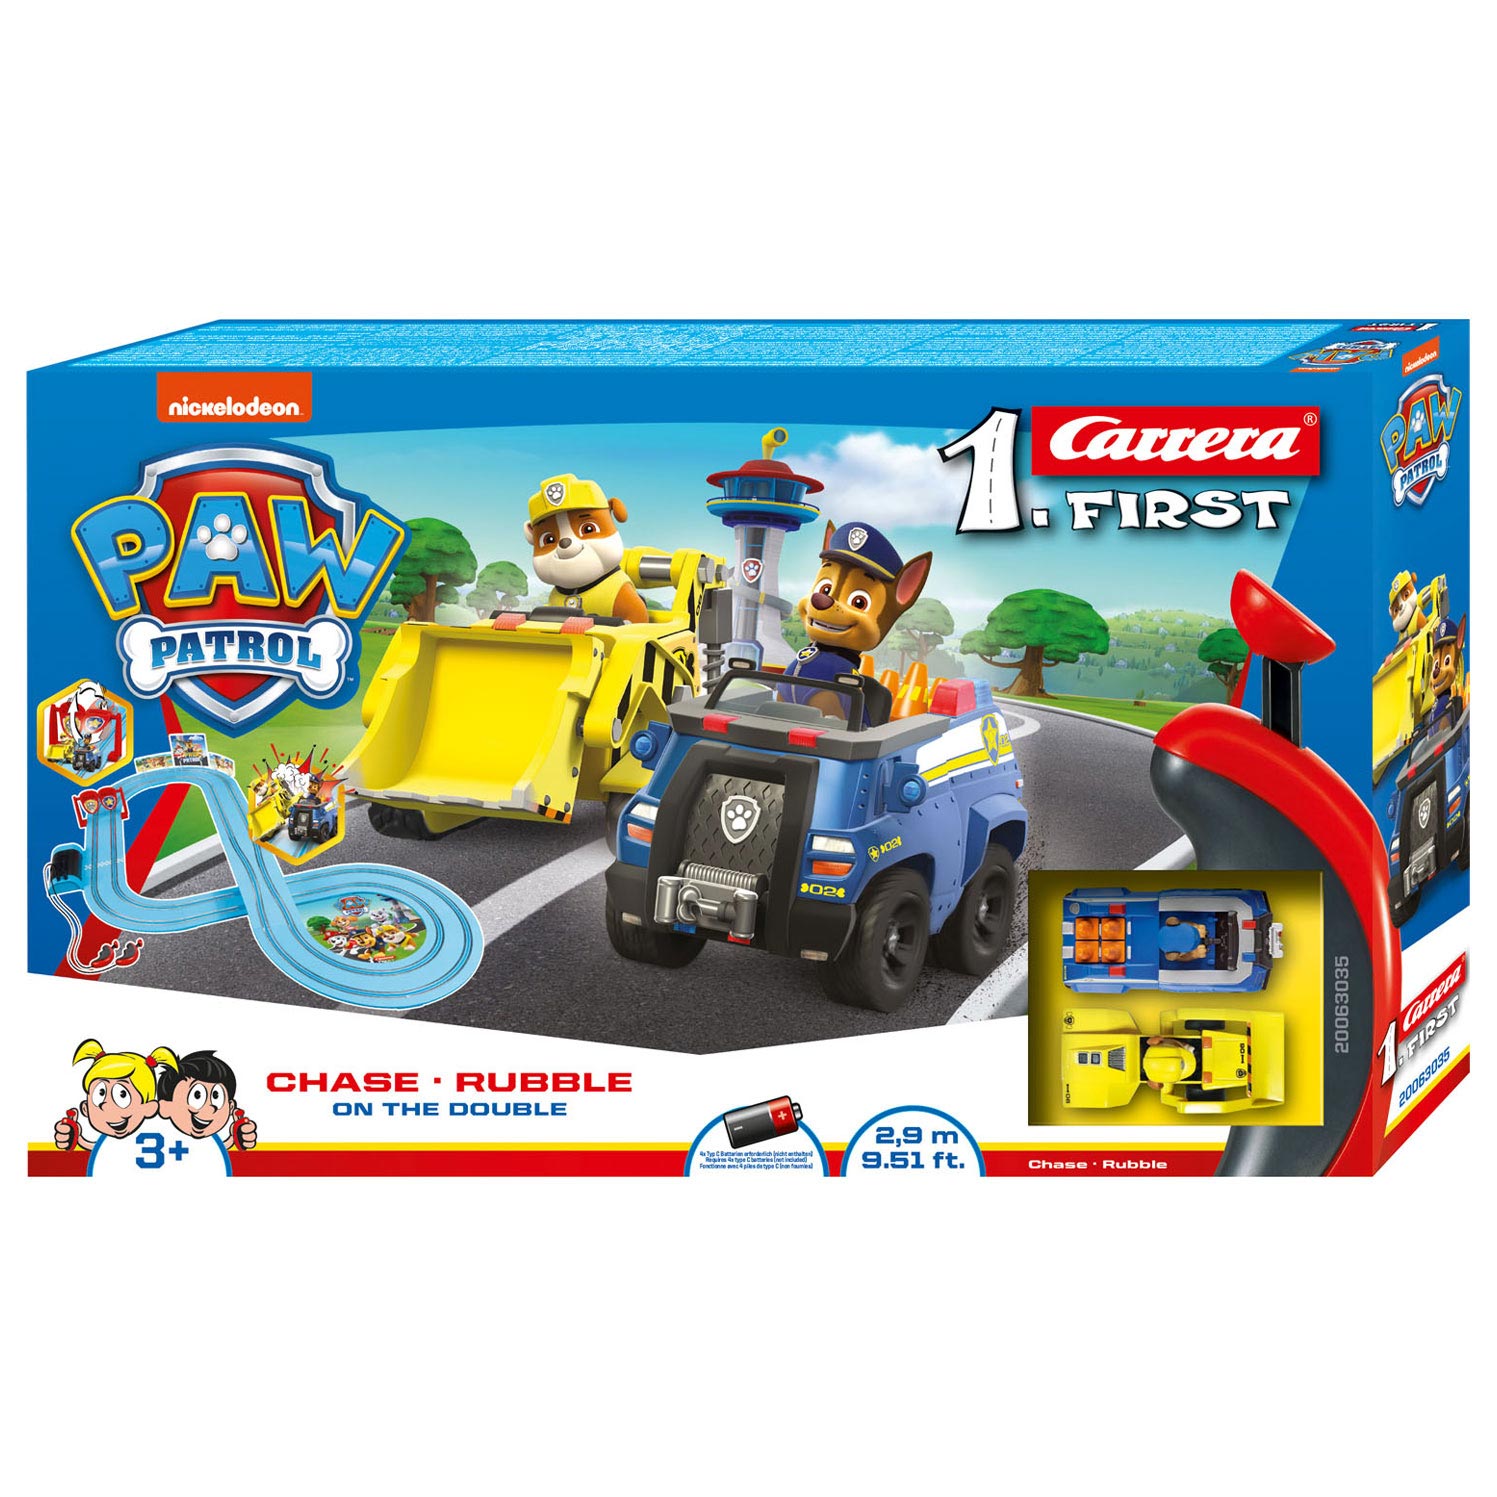 Carrera First Race Track - PAW Patrol 'On the Double' | Thimble Toys